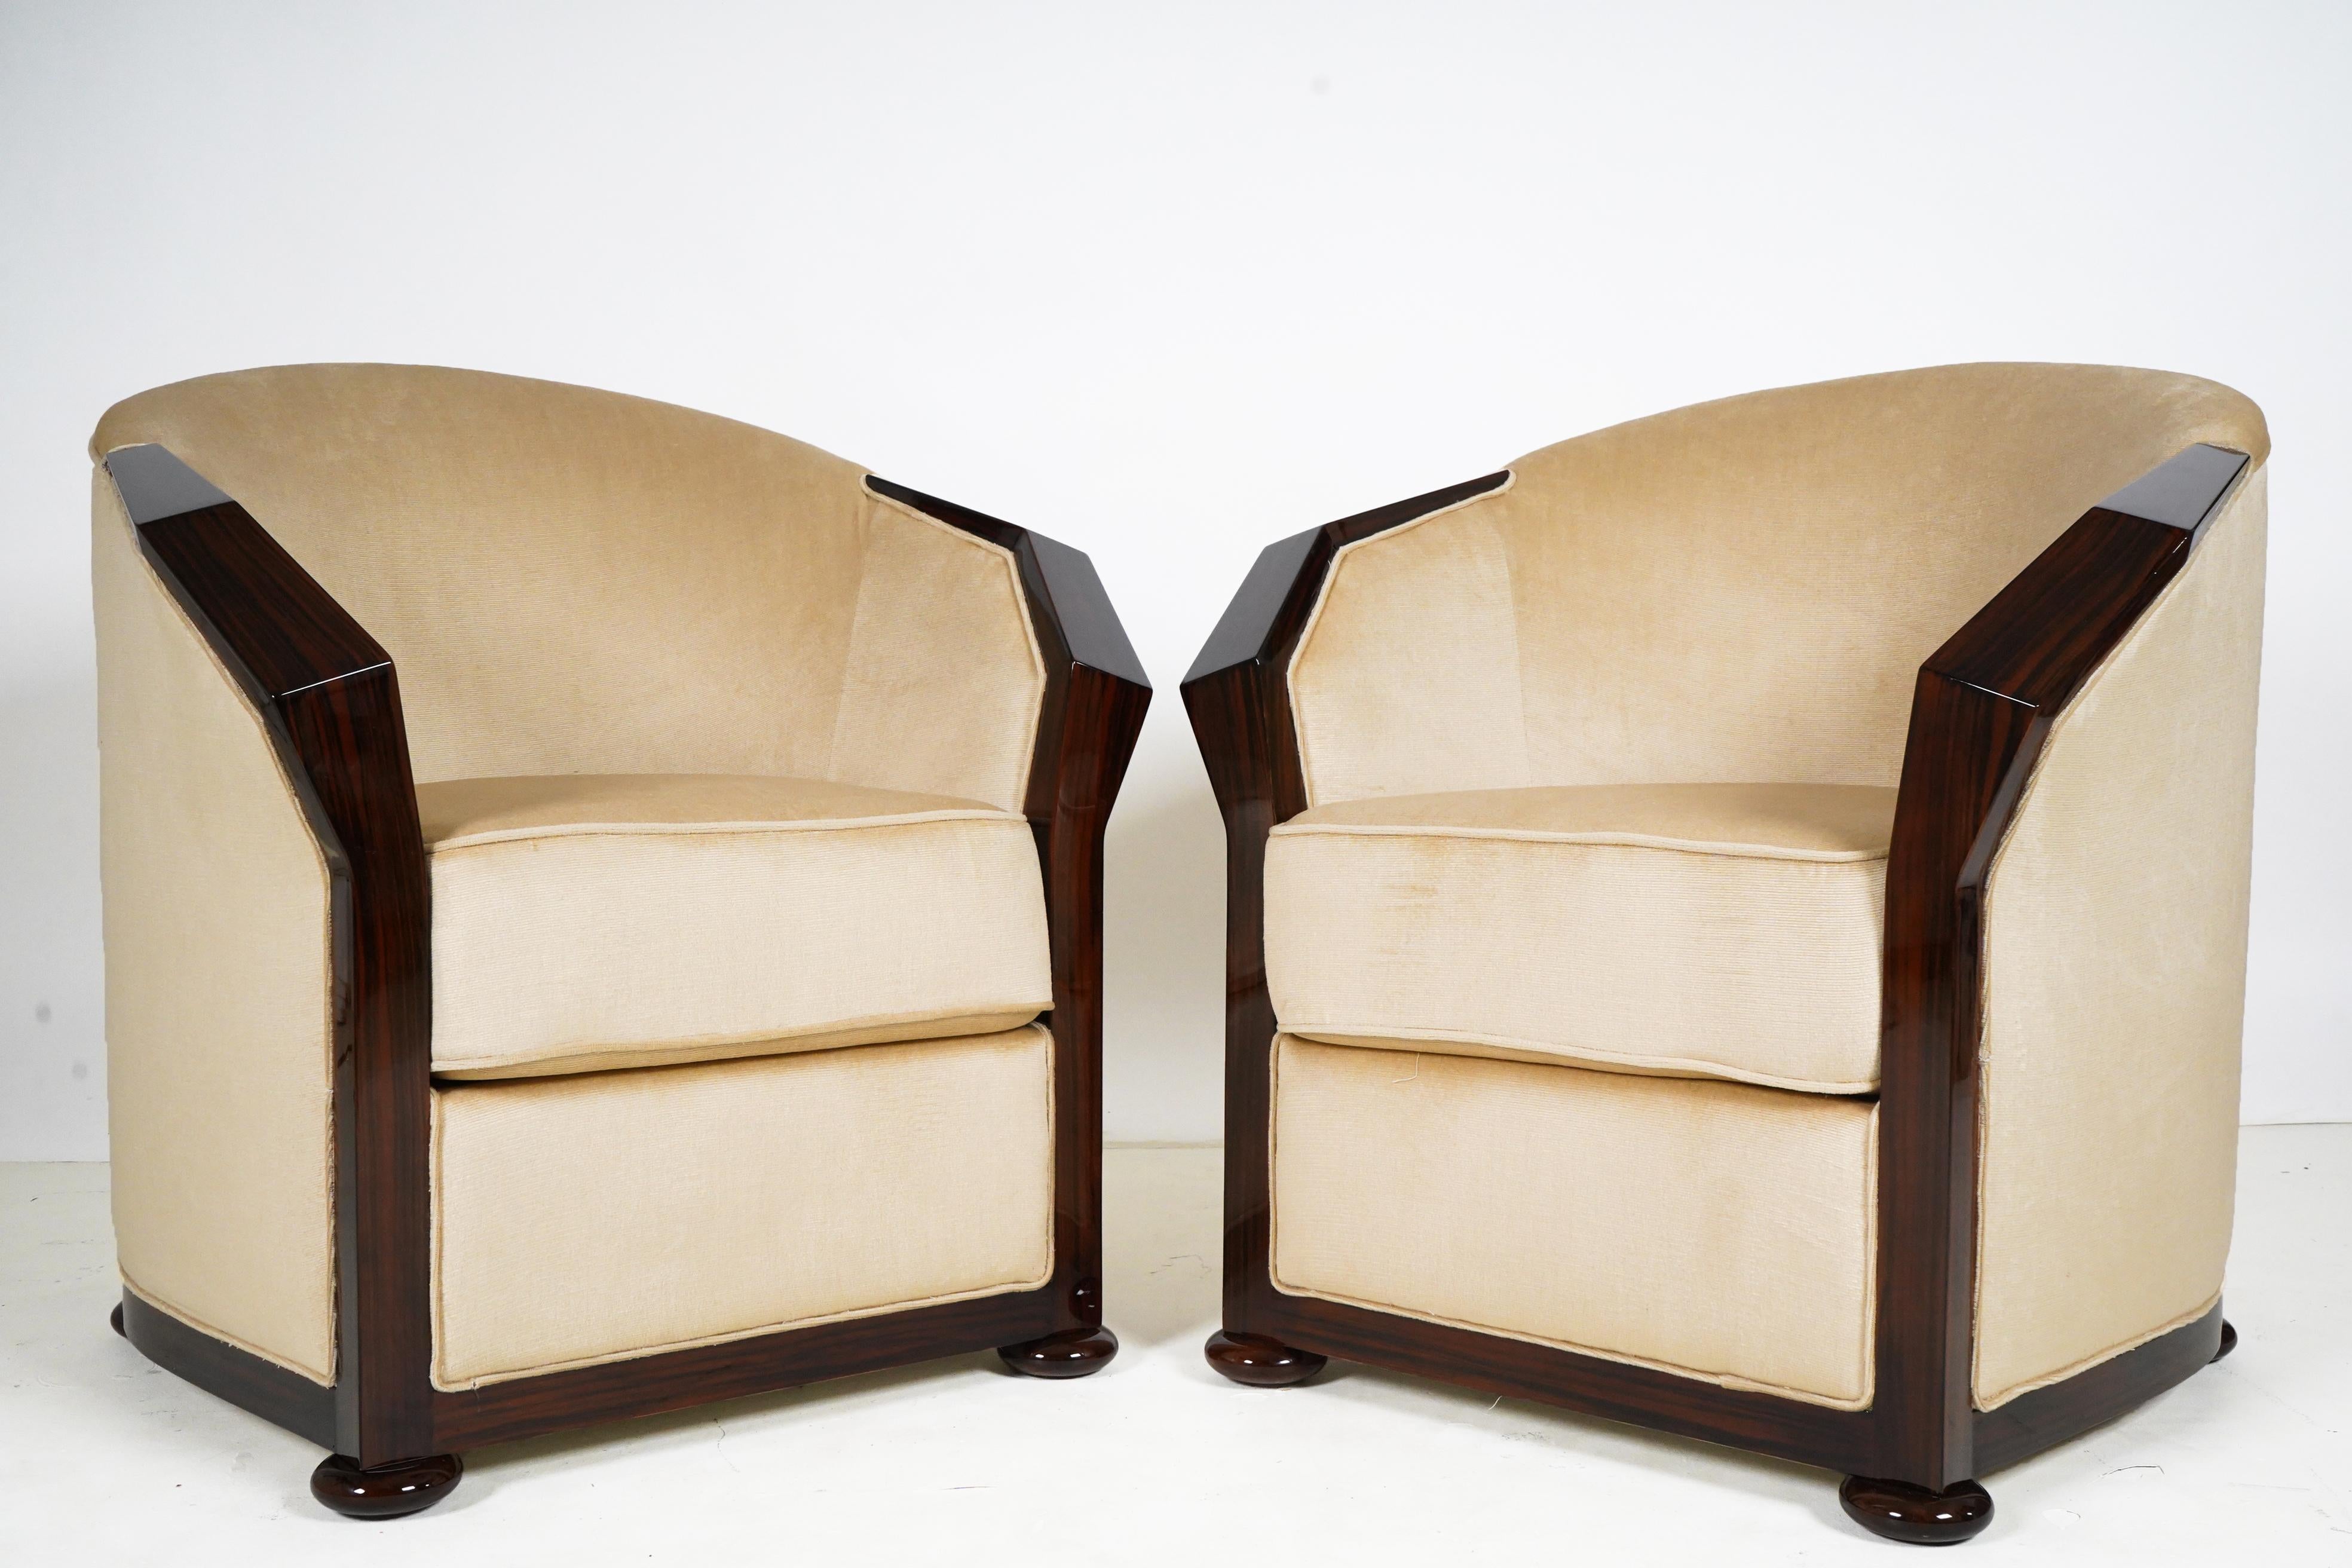 Hungarian Pair of Art Deco Style Armchairs with Walnut Veneers For Sale